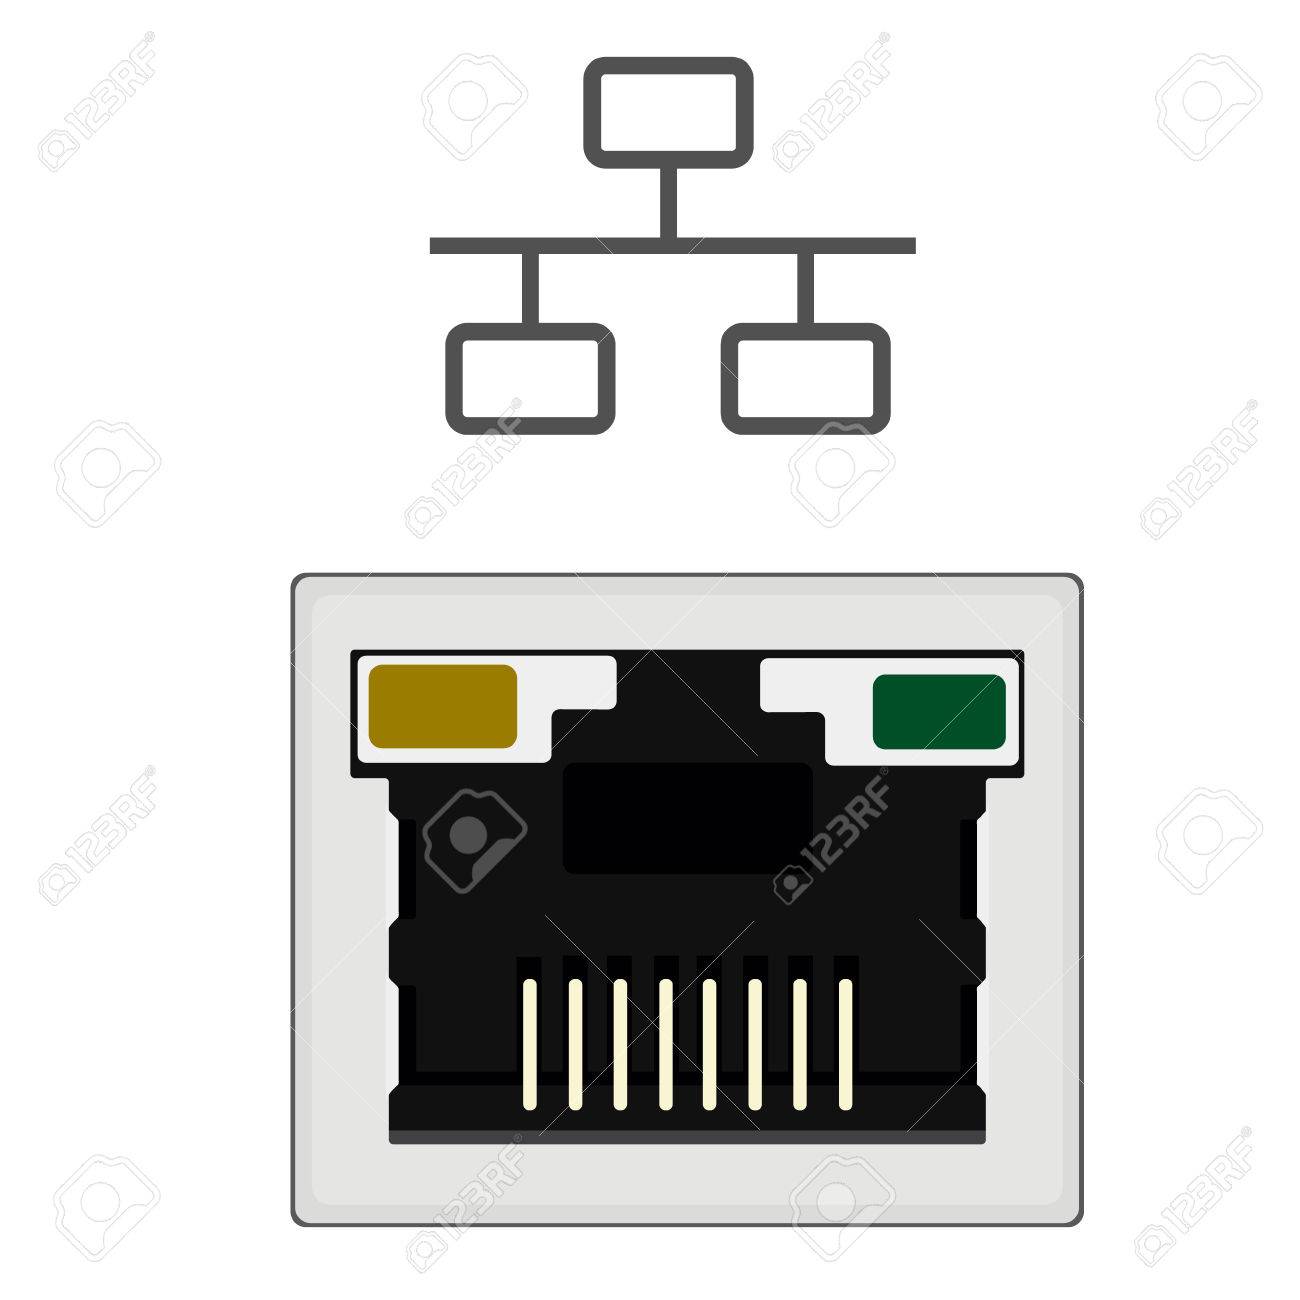 Network Ethernet Port Network Router Switch Stock Vector 267446963 